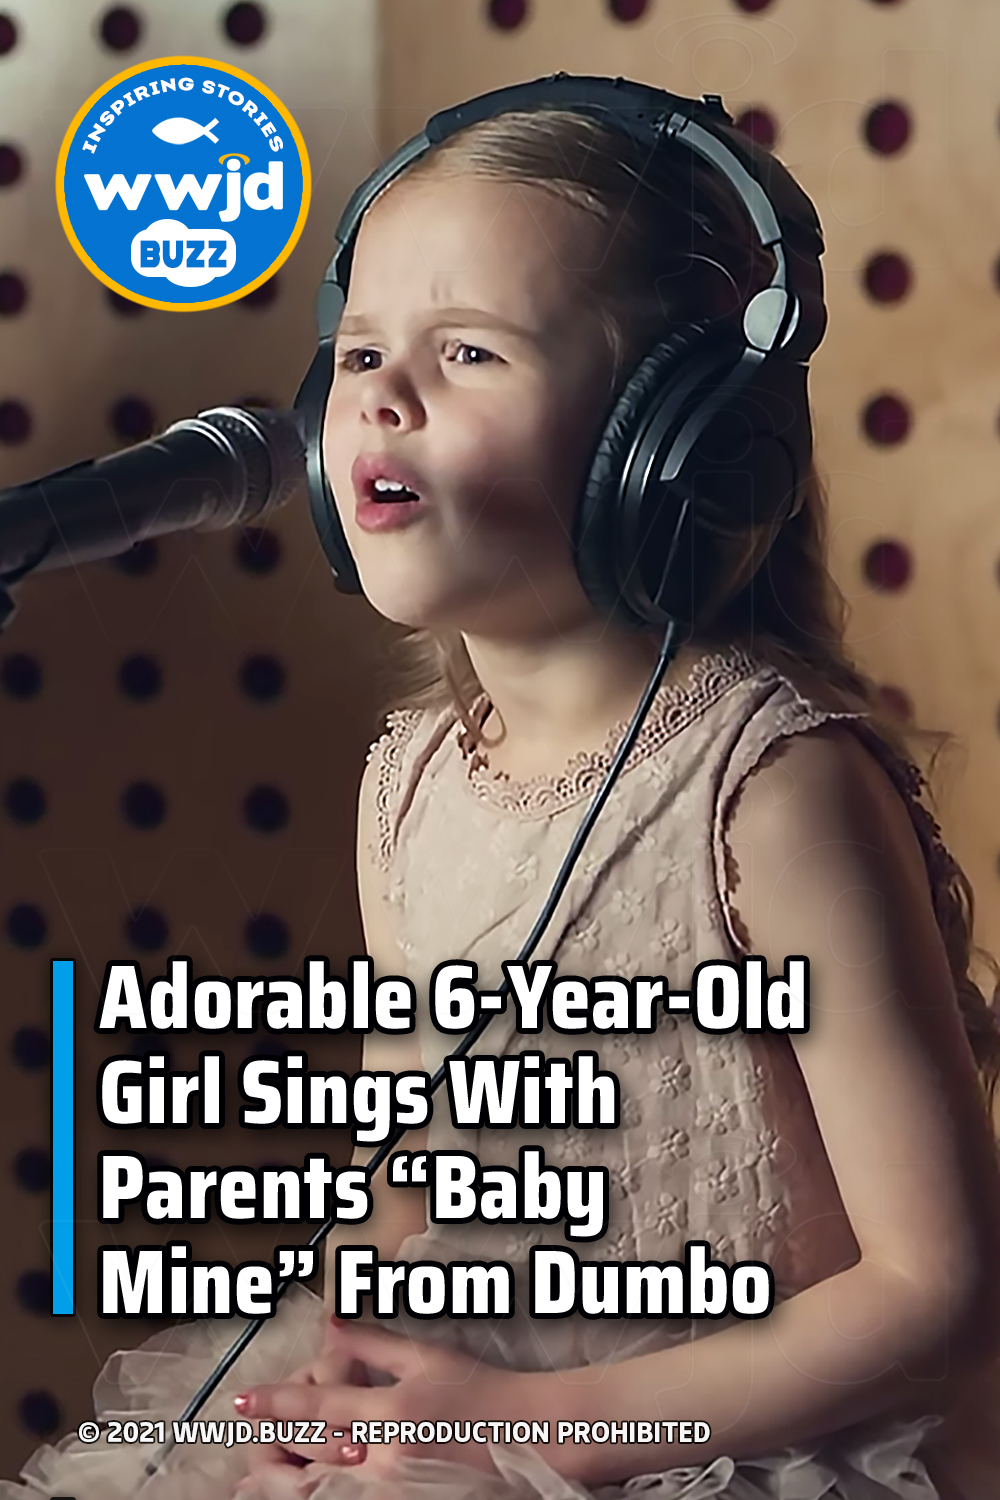 Adorable 6-Year-Old Girl Sings With Parents “Baby Mine” From Dumbo